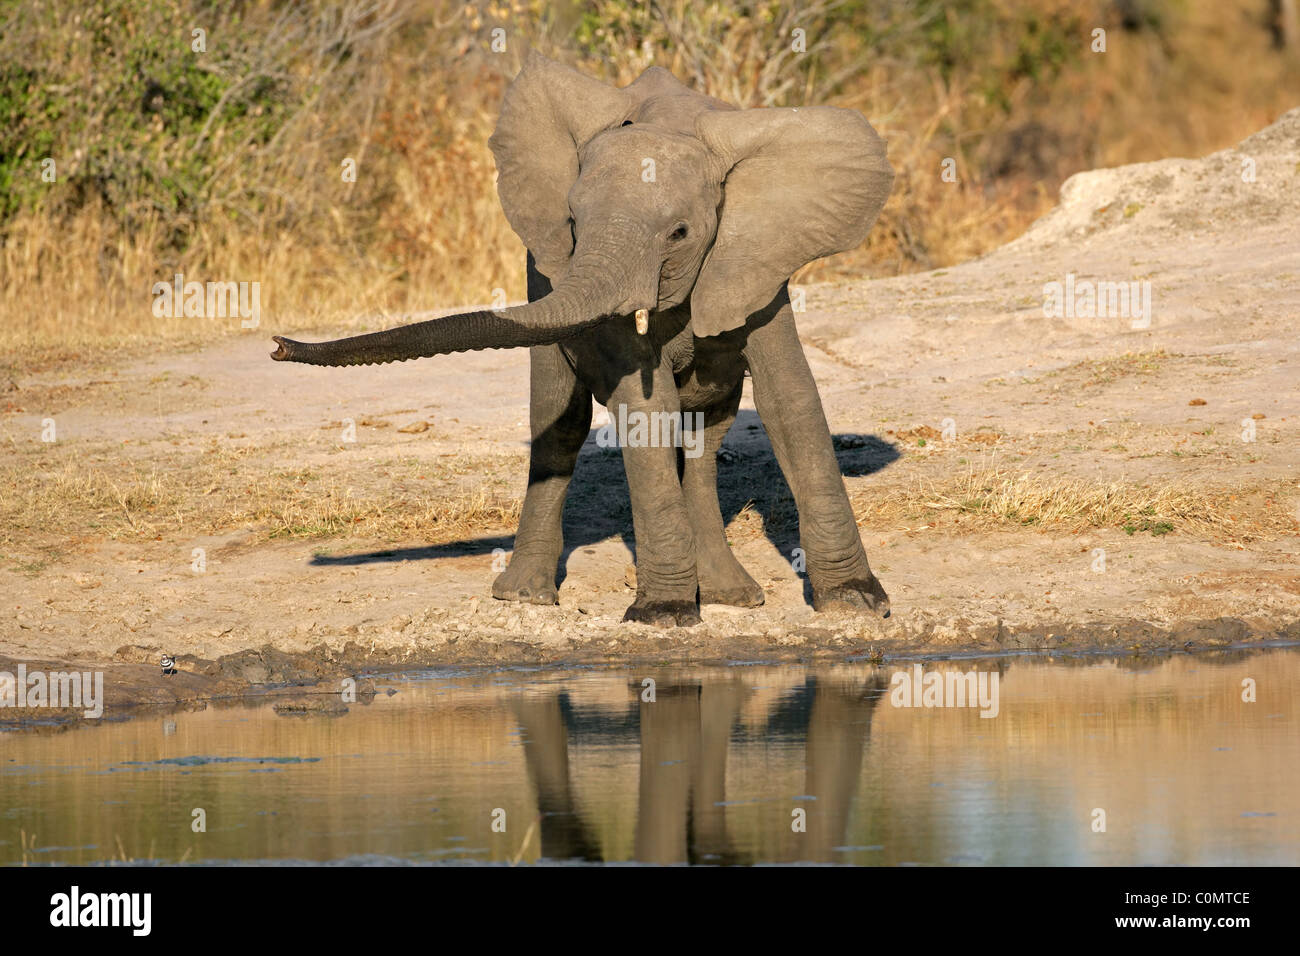 Young African elephant (Loxodonta africana) at a waterhole, South Africa Stock Photo